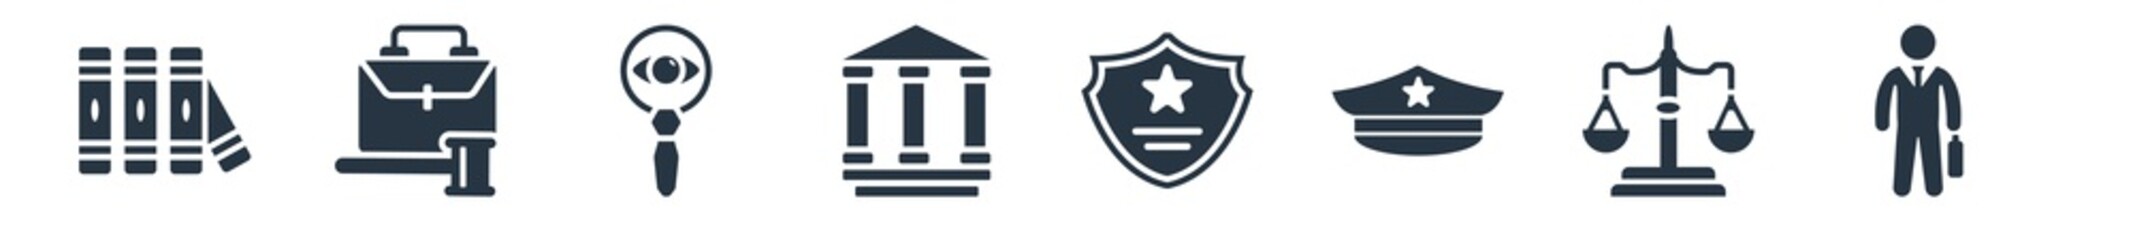 law and justice filled icons. glyph vector icons such as employment, justice scale, police cap, police badge, law and justice, investigation, employment law sign isolated on white background.